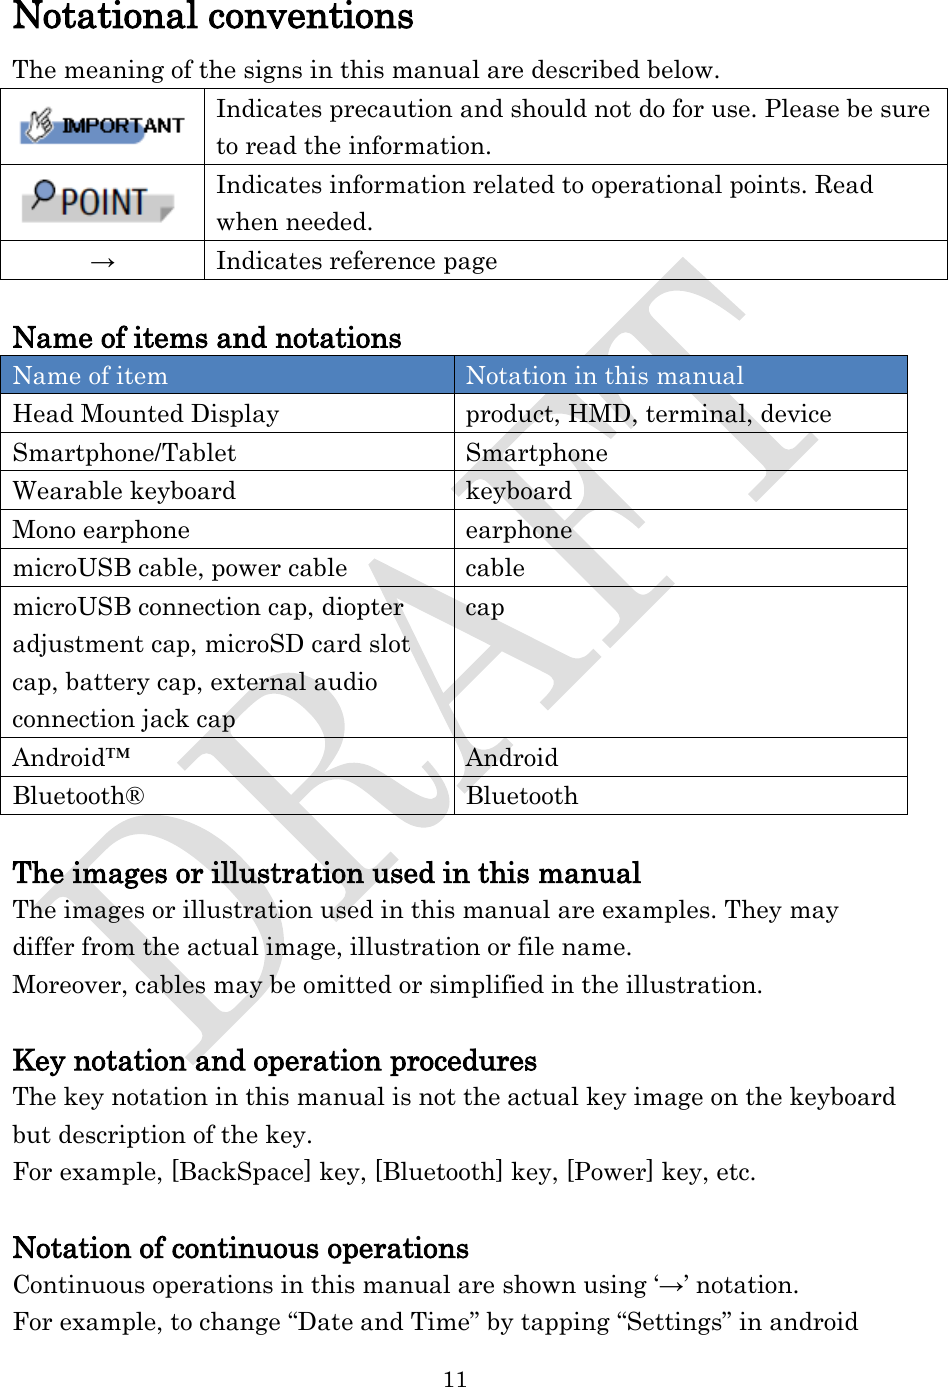  11  Notational conventions The meaning of the signs in this manual are described below.  Indicates precaution and should not do for use. Please be sure to read the information.  Indicates information related to operational points. Read when needed. → Indicates reference page  Name of items and notations Name of item Notation in this manual Head Mounted Display product, HMD, terminal, device Smartphone/Tablet Smartphone Wearable keyboard keyboard Mono earphone earphone microUSB cable, power cable cable microUSB connection cap, diopter adjustment cap, microSD card slot cap, battery cap, external audio connection jack cap cap Android™ Android Bluetooth® Bluetooth  The images or illustration used in this manual The images or illustration used in this manual are examples. They may differ from the actual image, illustration or file name. Moreover, cables may be omitted or simplified in the illustration.  Key notation and operation procedures The key notation in this manual is not the actual key image on the keyboard but description of the key.   For example, [BackSpace] key, [Bluetooth] key, [Power] key, etc.  Notation of continuous operations Continuous operations in this manual are shown using ‘→’ notation. For example, to change “Date and Time” by tapping “Settings” in android 